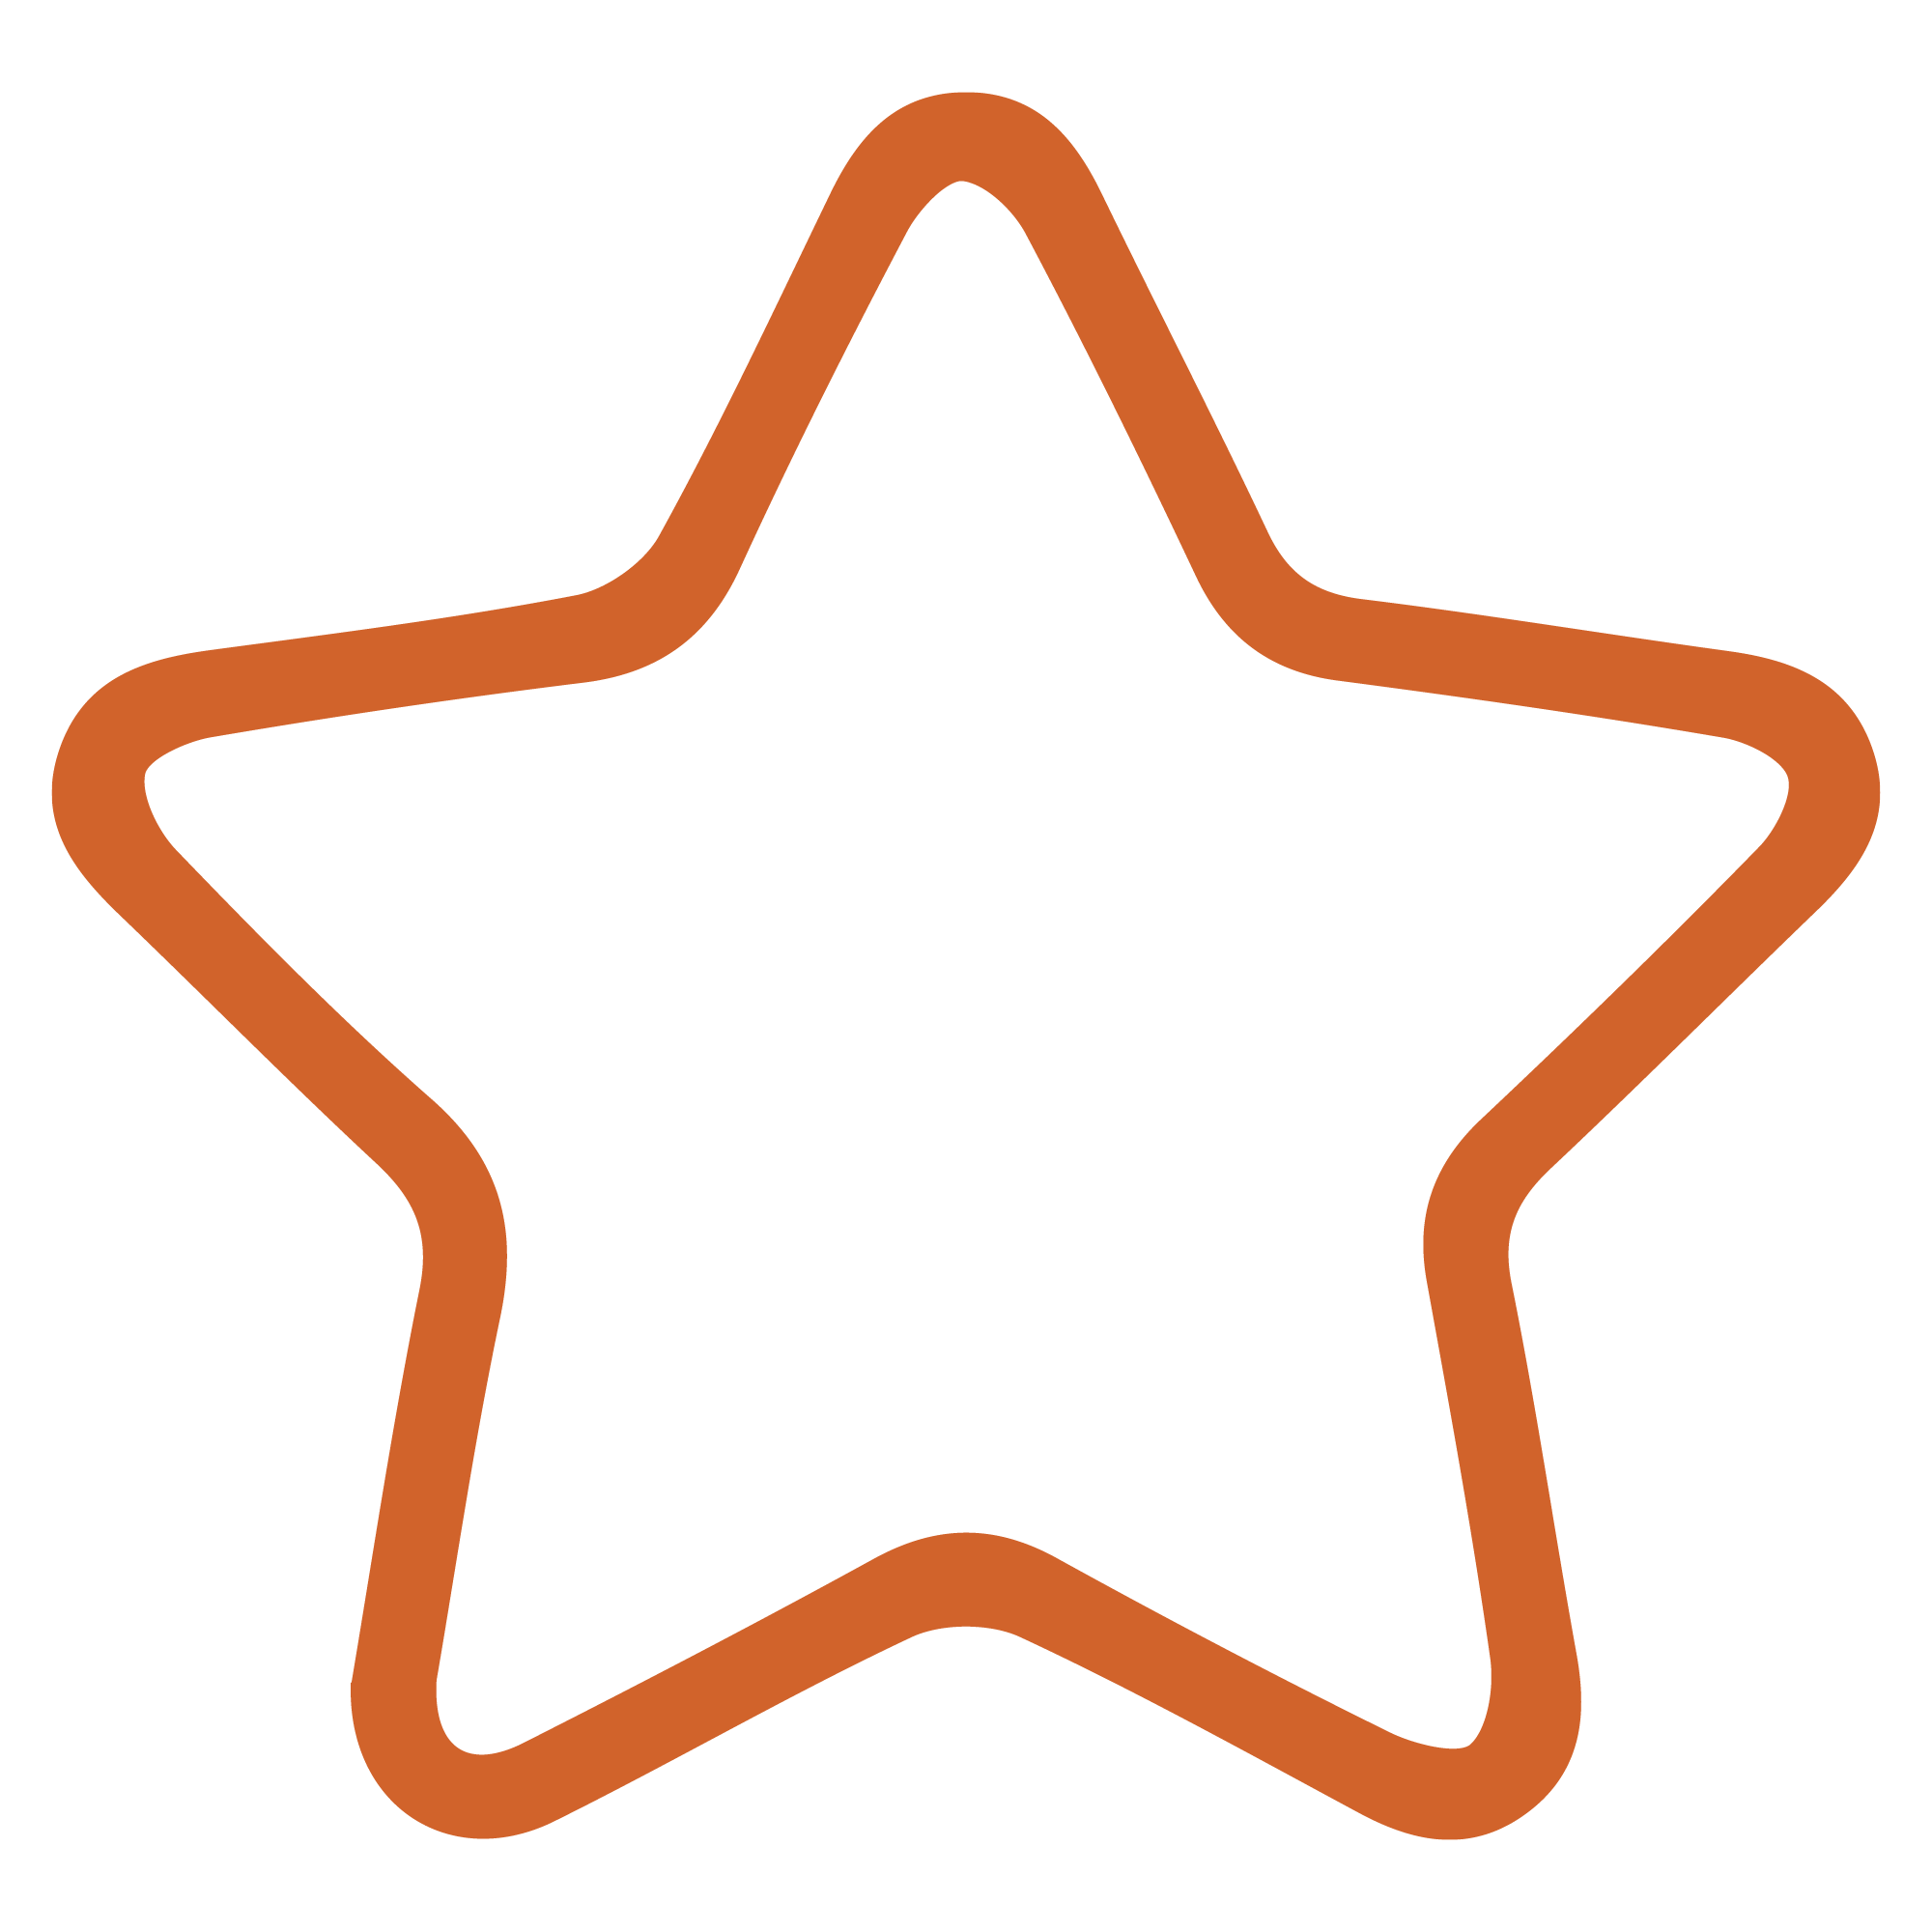 Image of star icon representing celebrity.